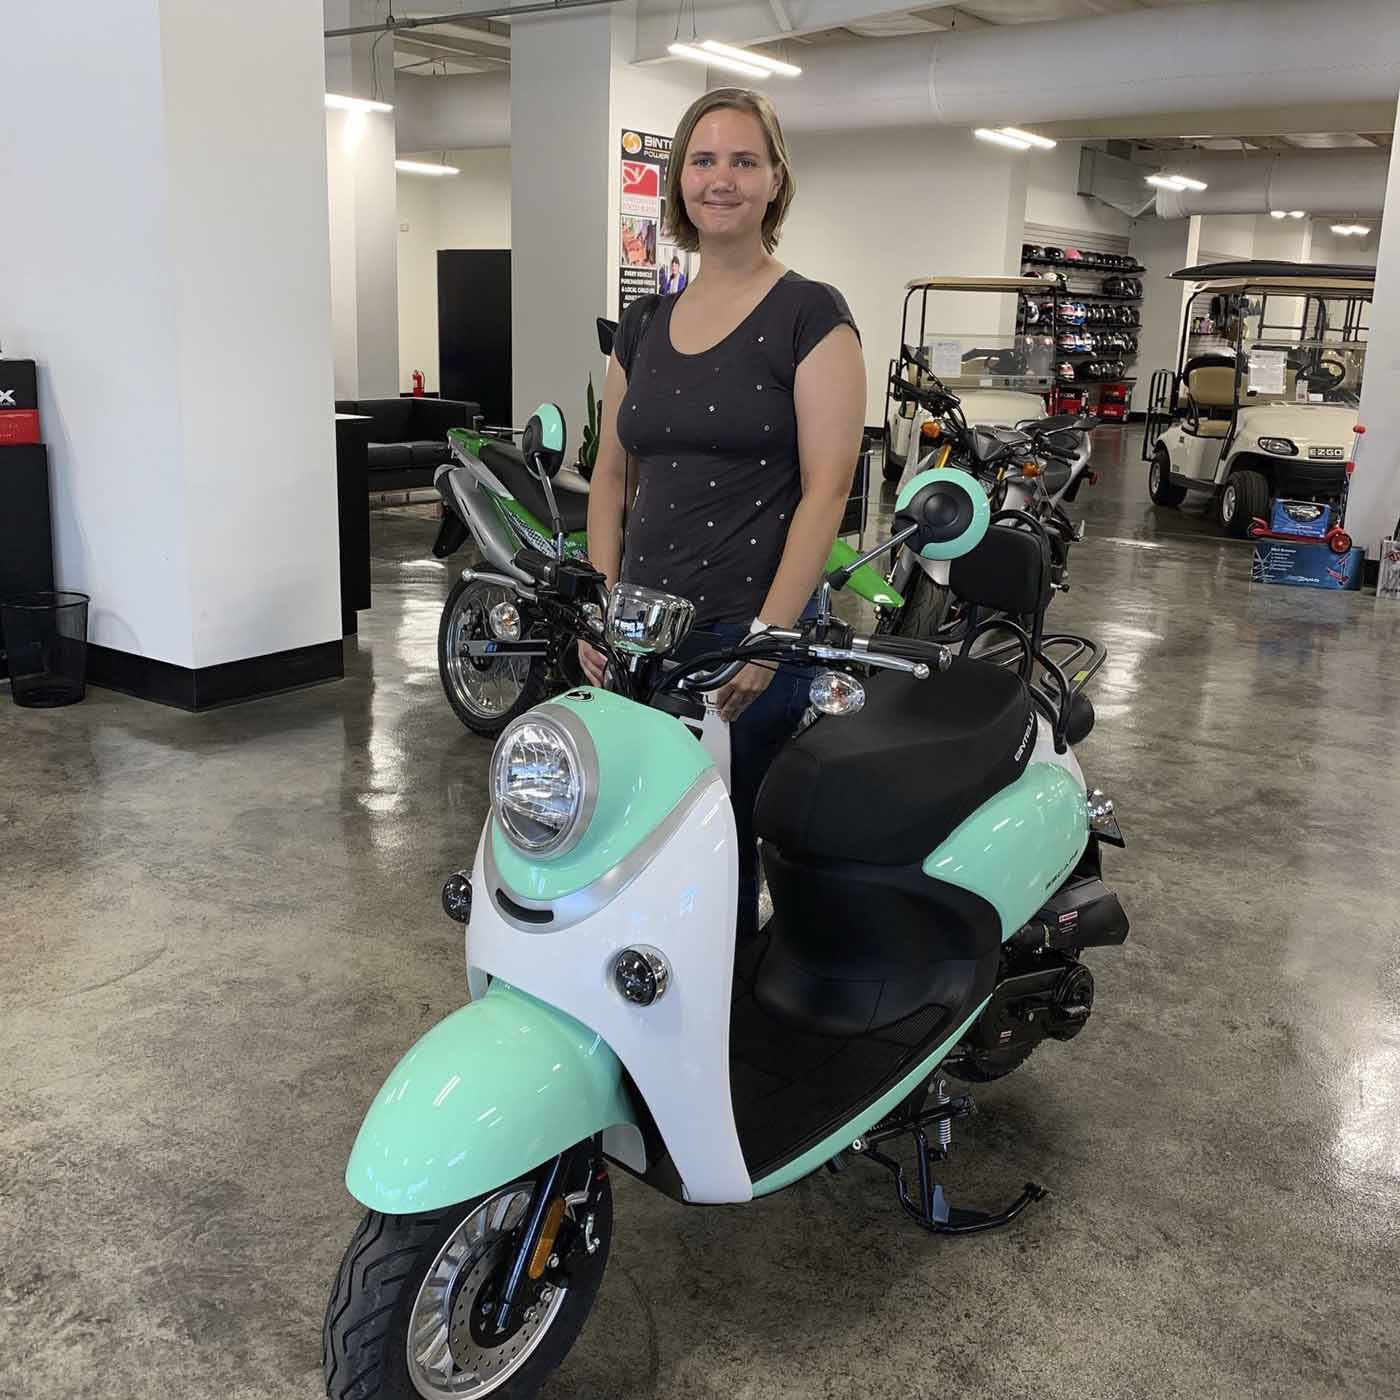 A women with the brand new Bintelli Escape Moped